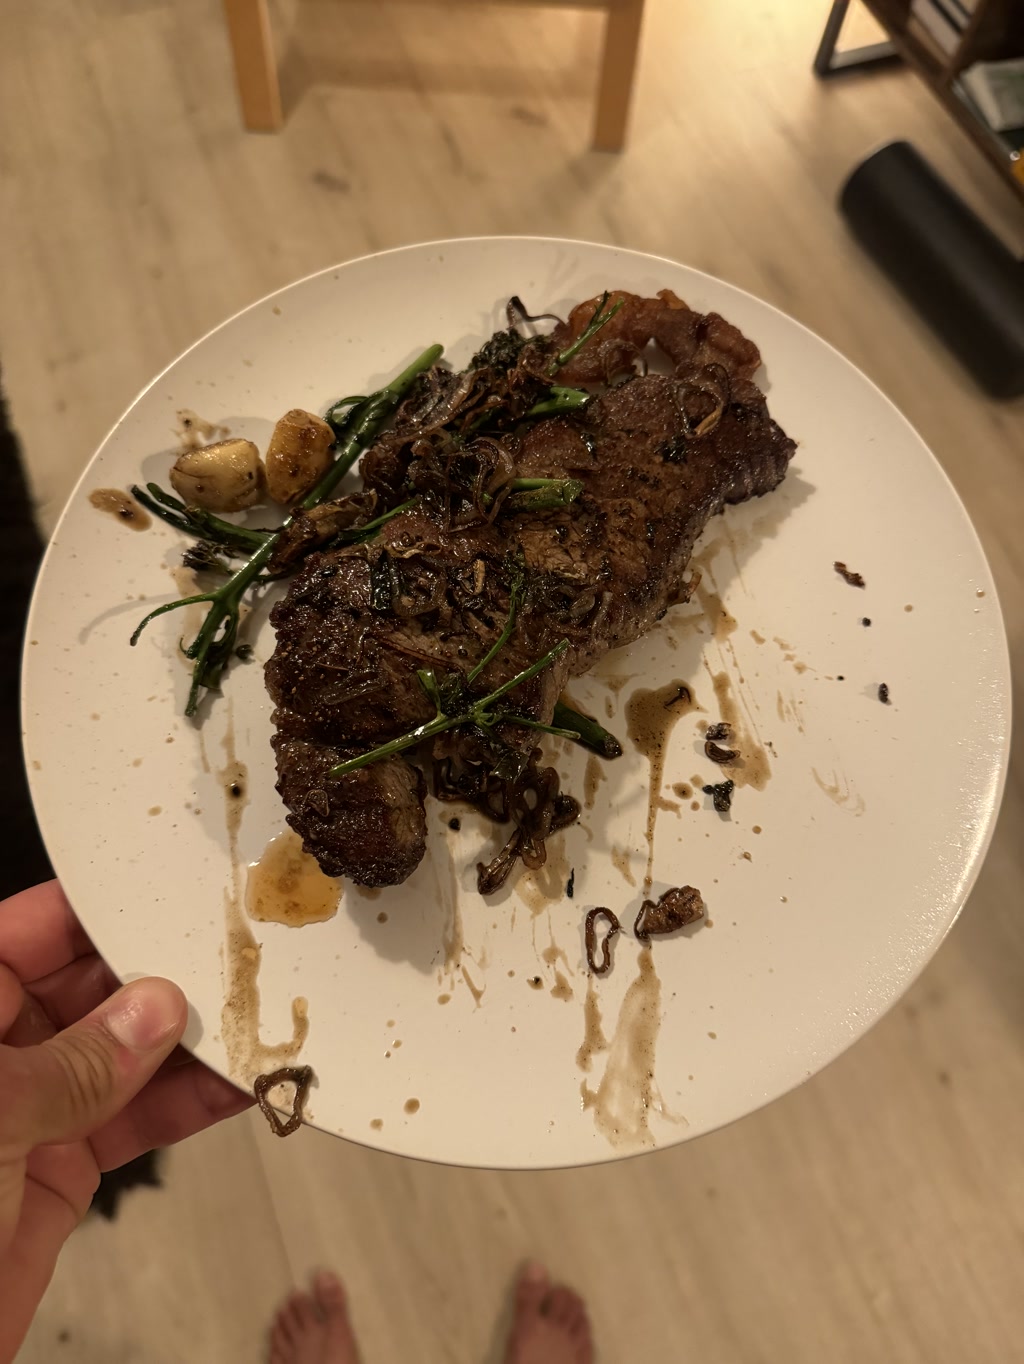 The photo shows a cooked steak with browned edges and visible grilling marks, suggesting it might be pan-seared or grilled. Accompanying the steak are some roasted garlic cloves and sprigs of a green herb, possibly rosemary, which are scattered on and around the meat. Also present are some fried crispy elements that could be onion or shallots. There are a few splashes and droplets, likely oil or a sauce, on the plate, indicating the steak may have been recently cooked or dressed. In the background, partially visible is a person holding the plate, with bare feet standing on a wooden floor, indicating an informal and personal setting. There's a hint of furniture in the far background, suggesting the photo was taken indoors in a living or dining area.